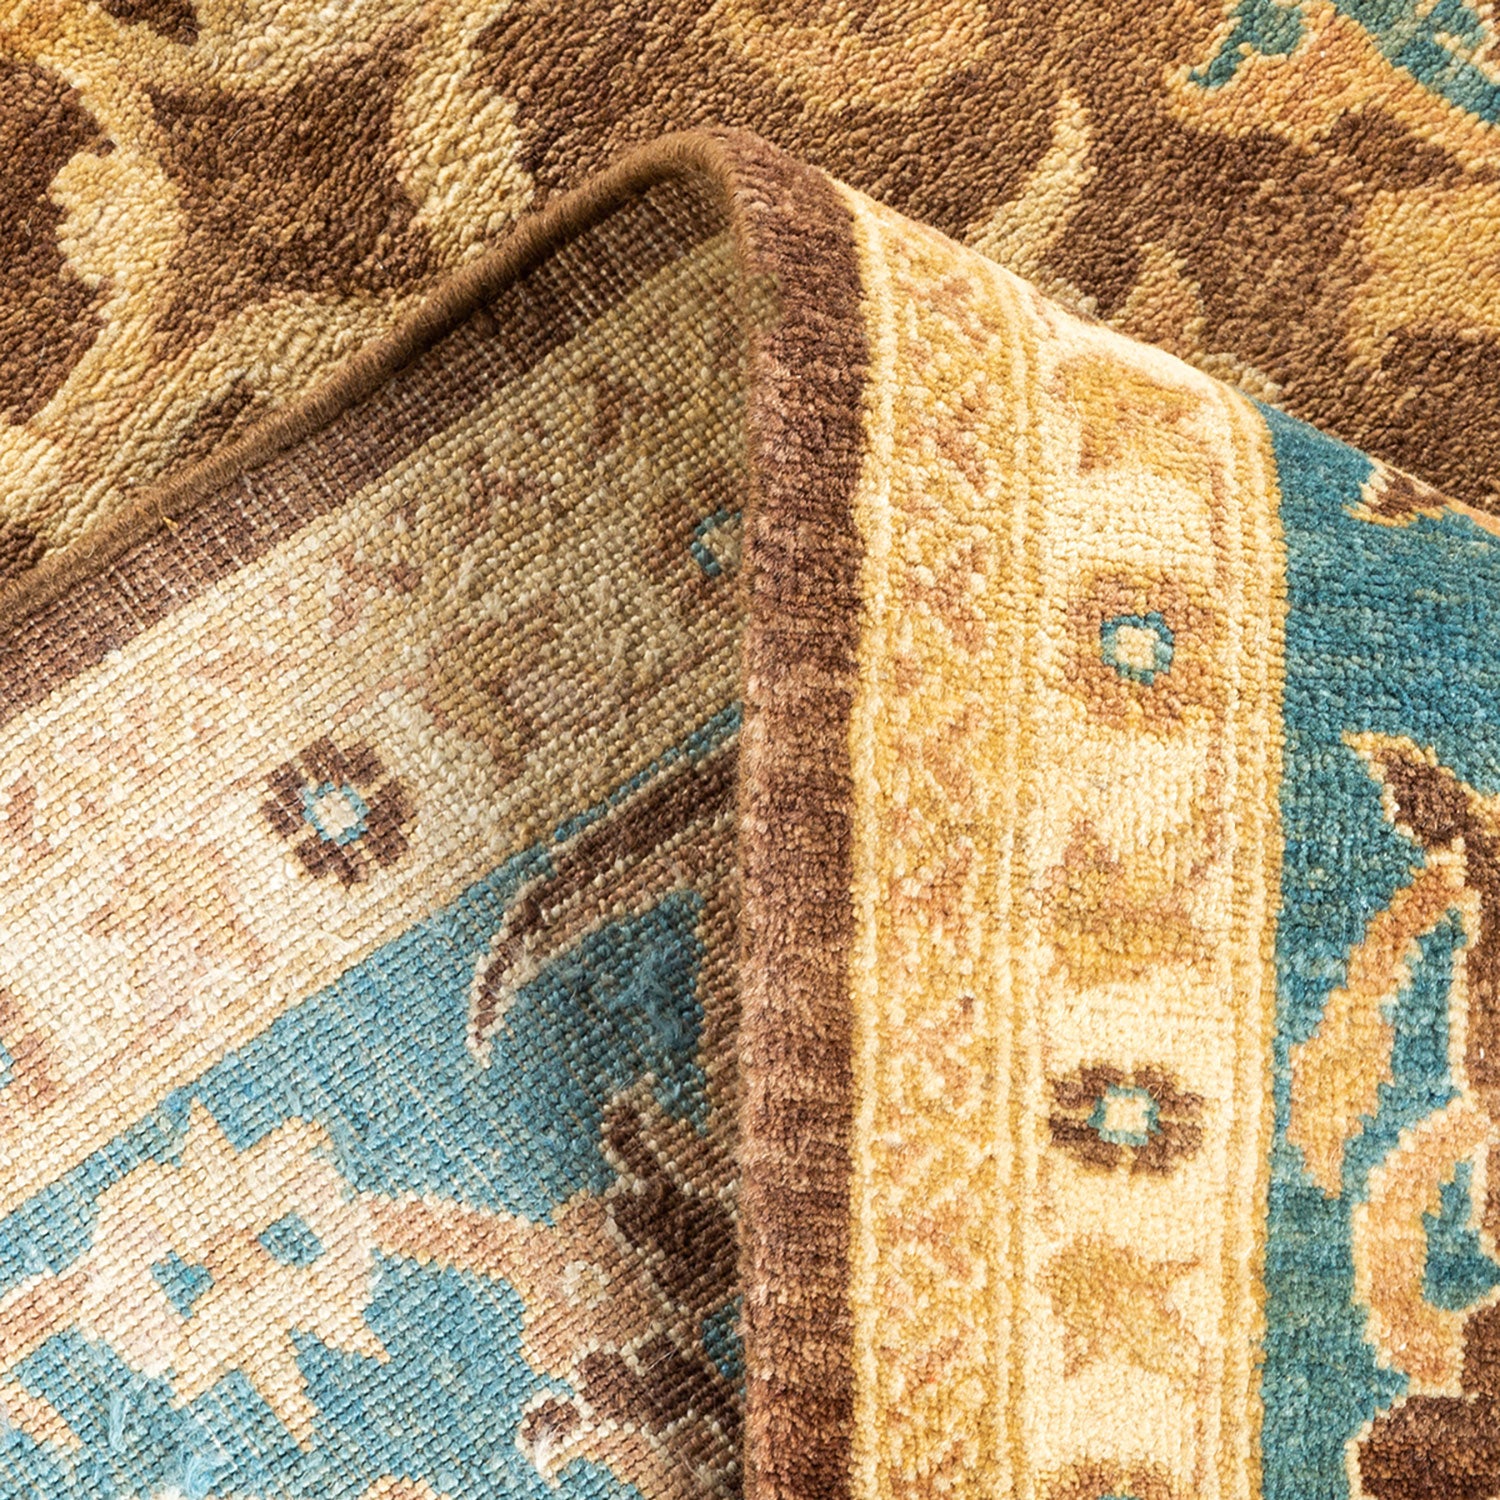 Close-up of a patterned rug displaying earthy tones and texture.